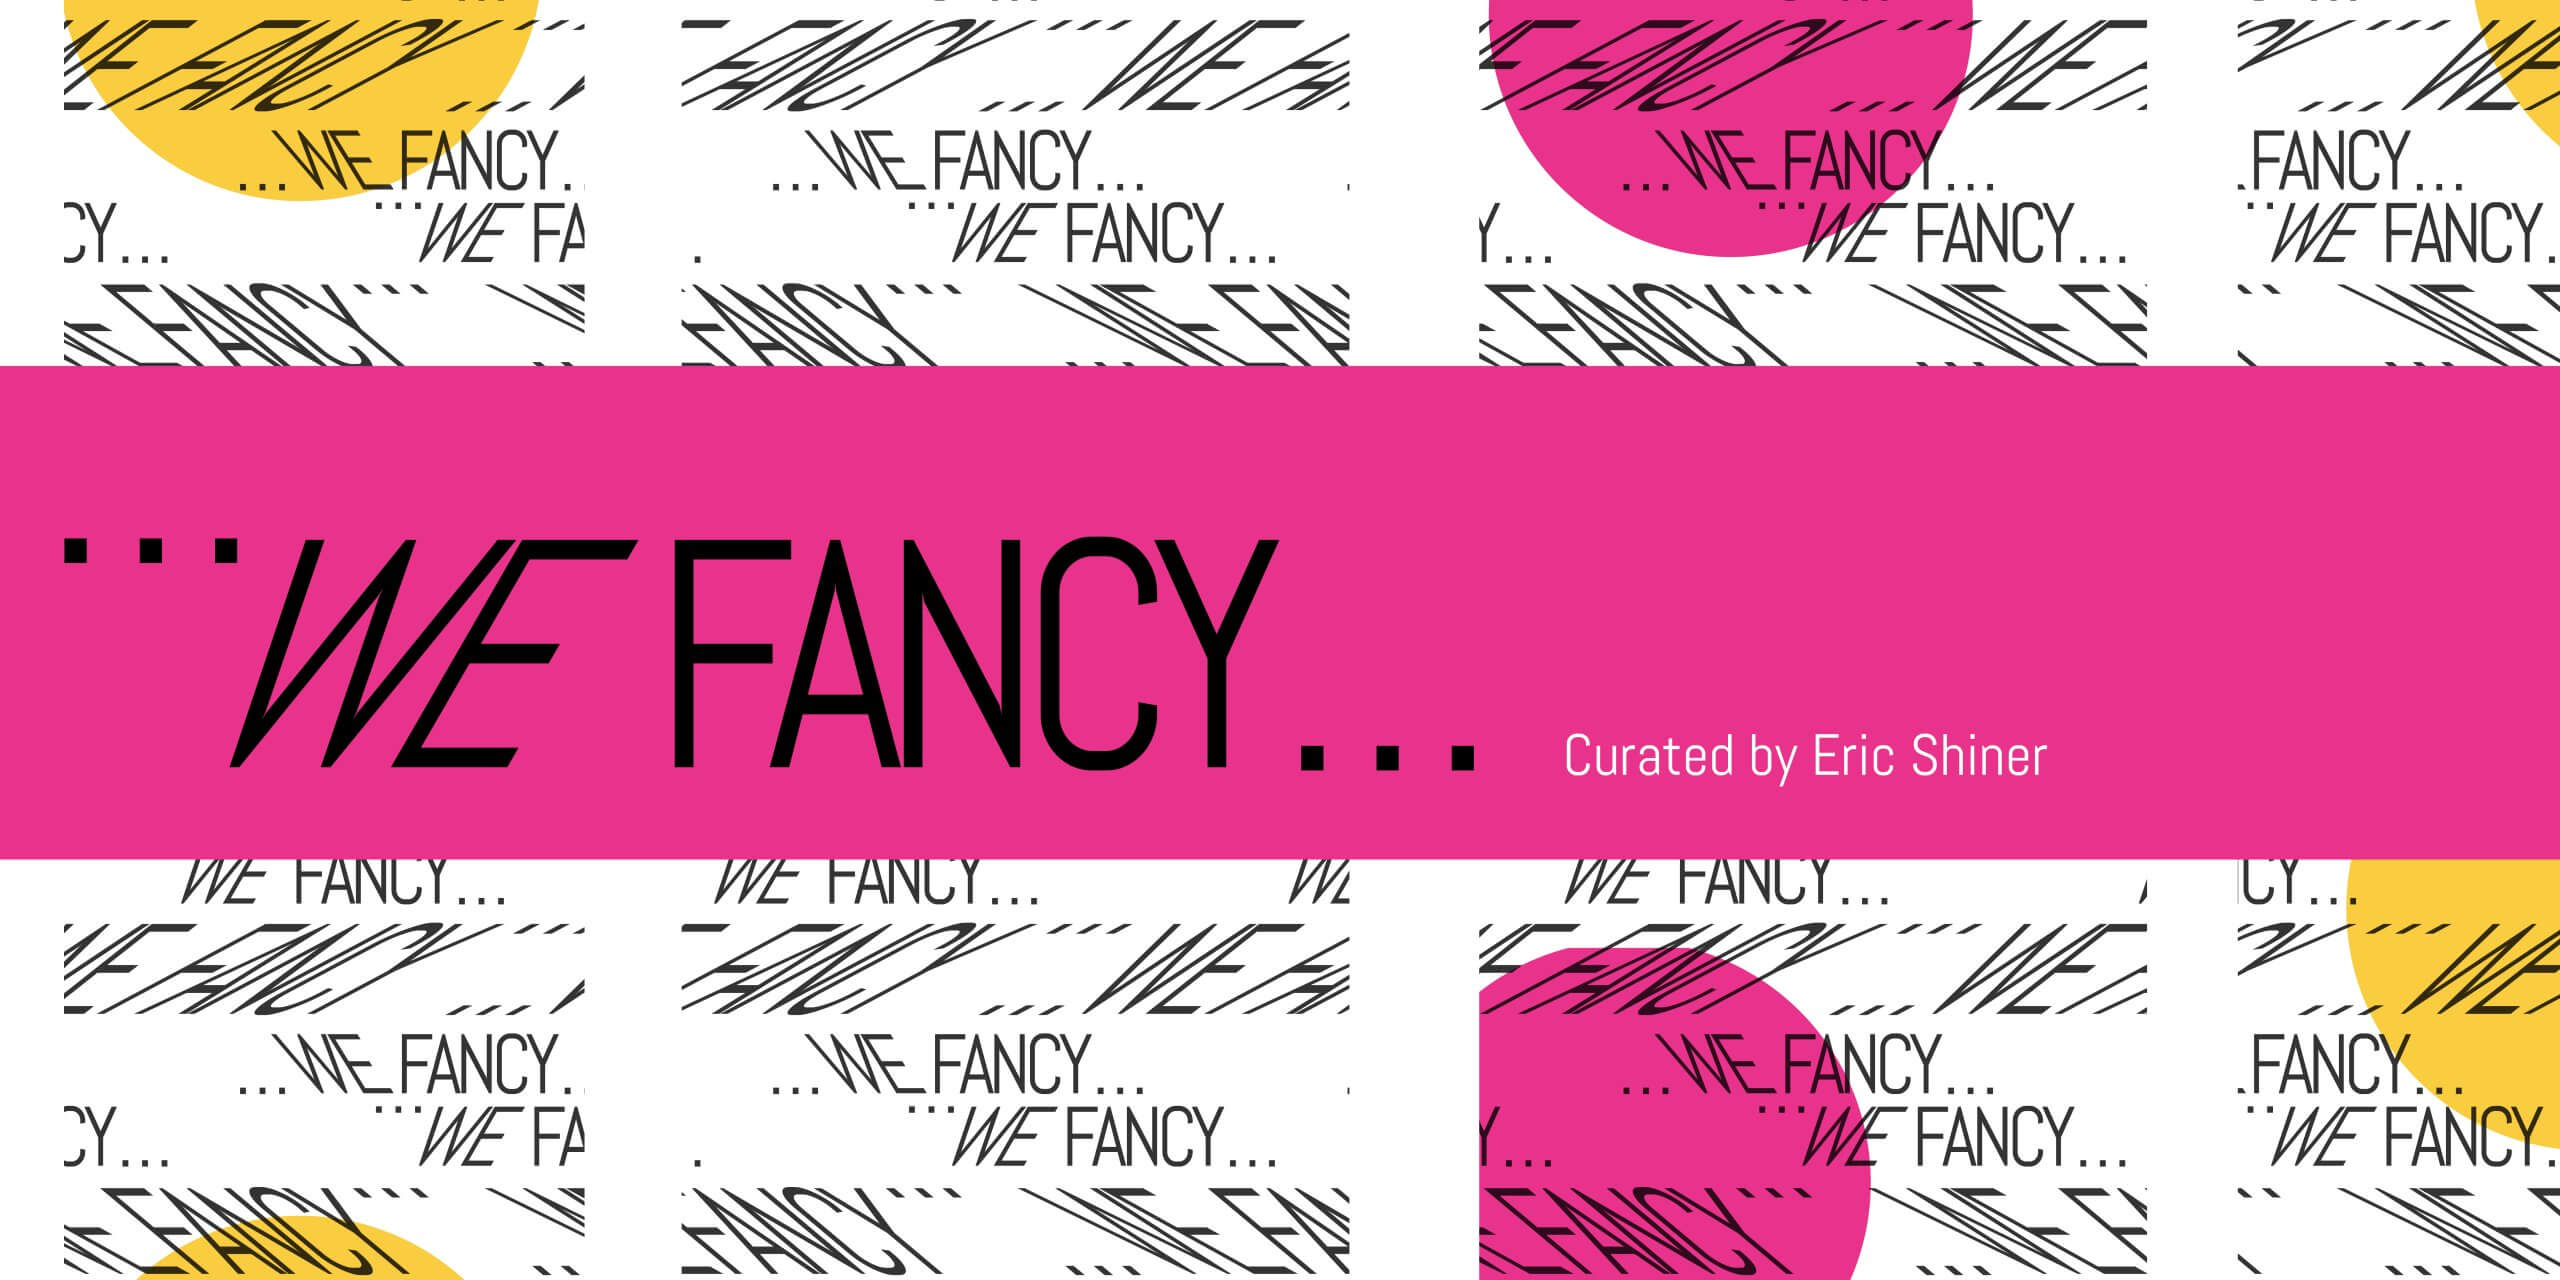 We Fancy: A Legacy of LGBTQIA+ Artists at the League